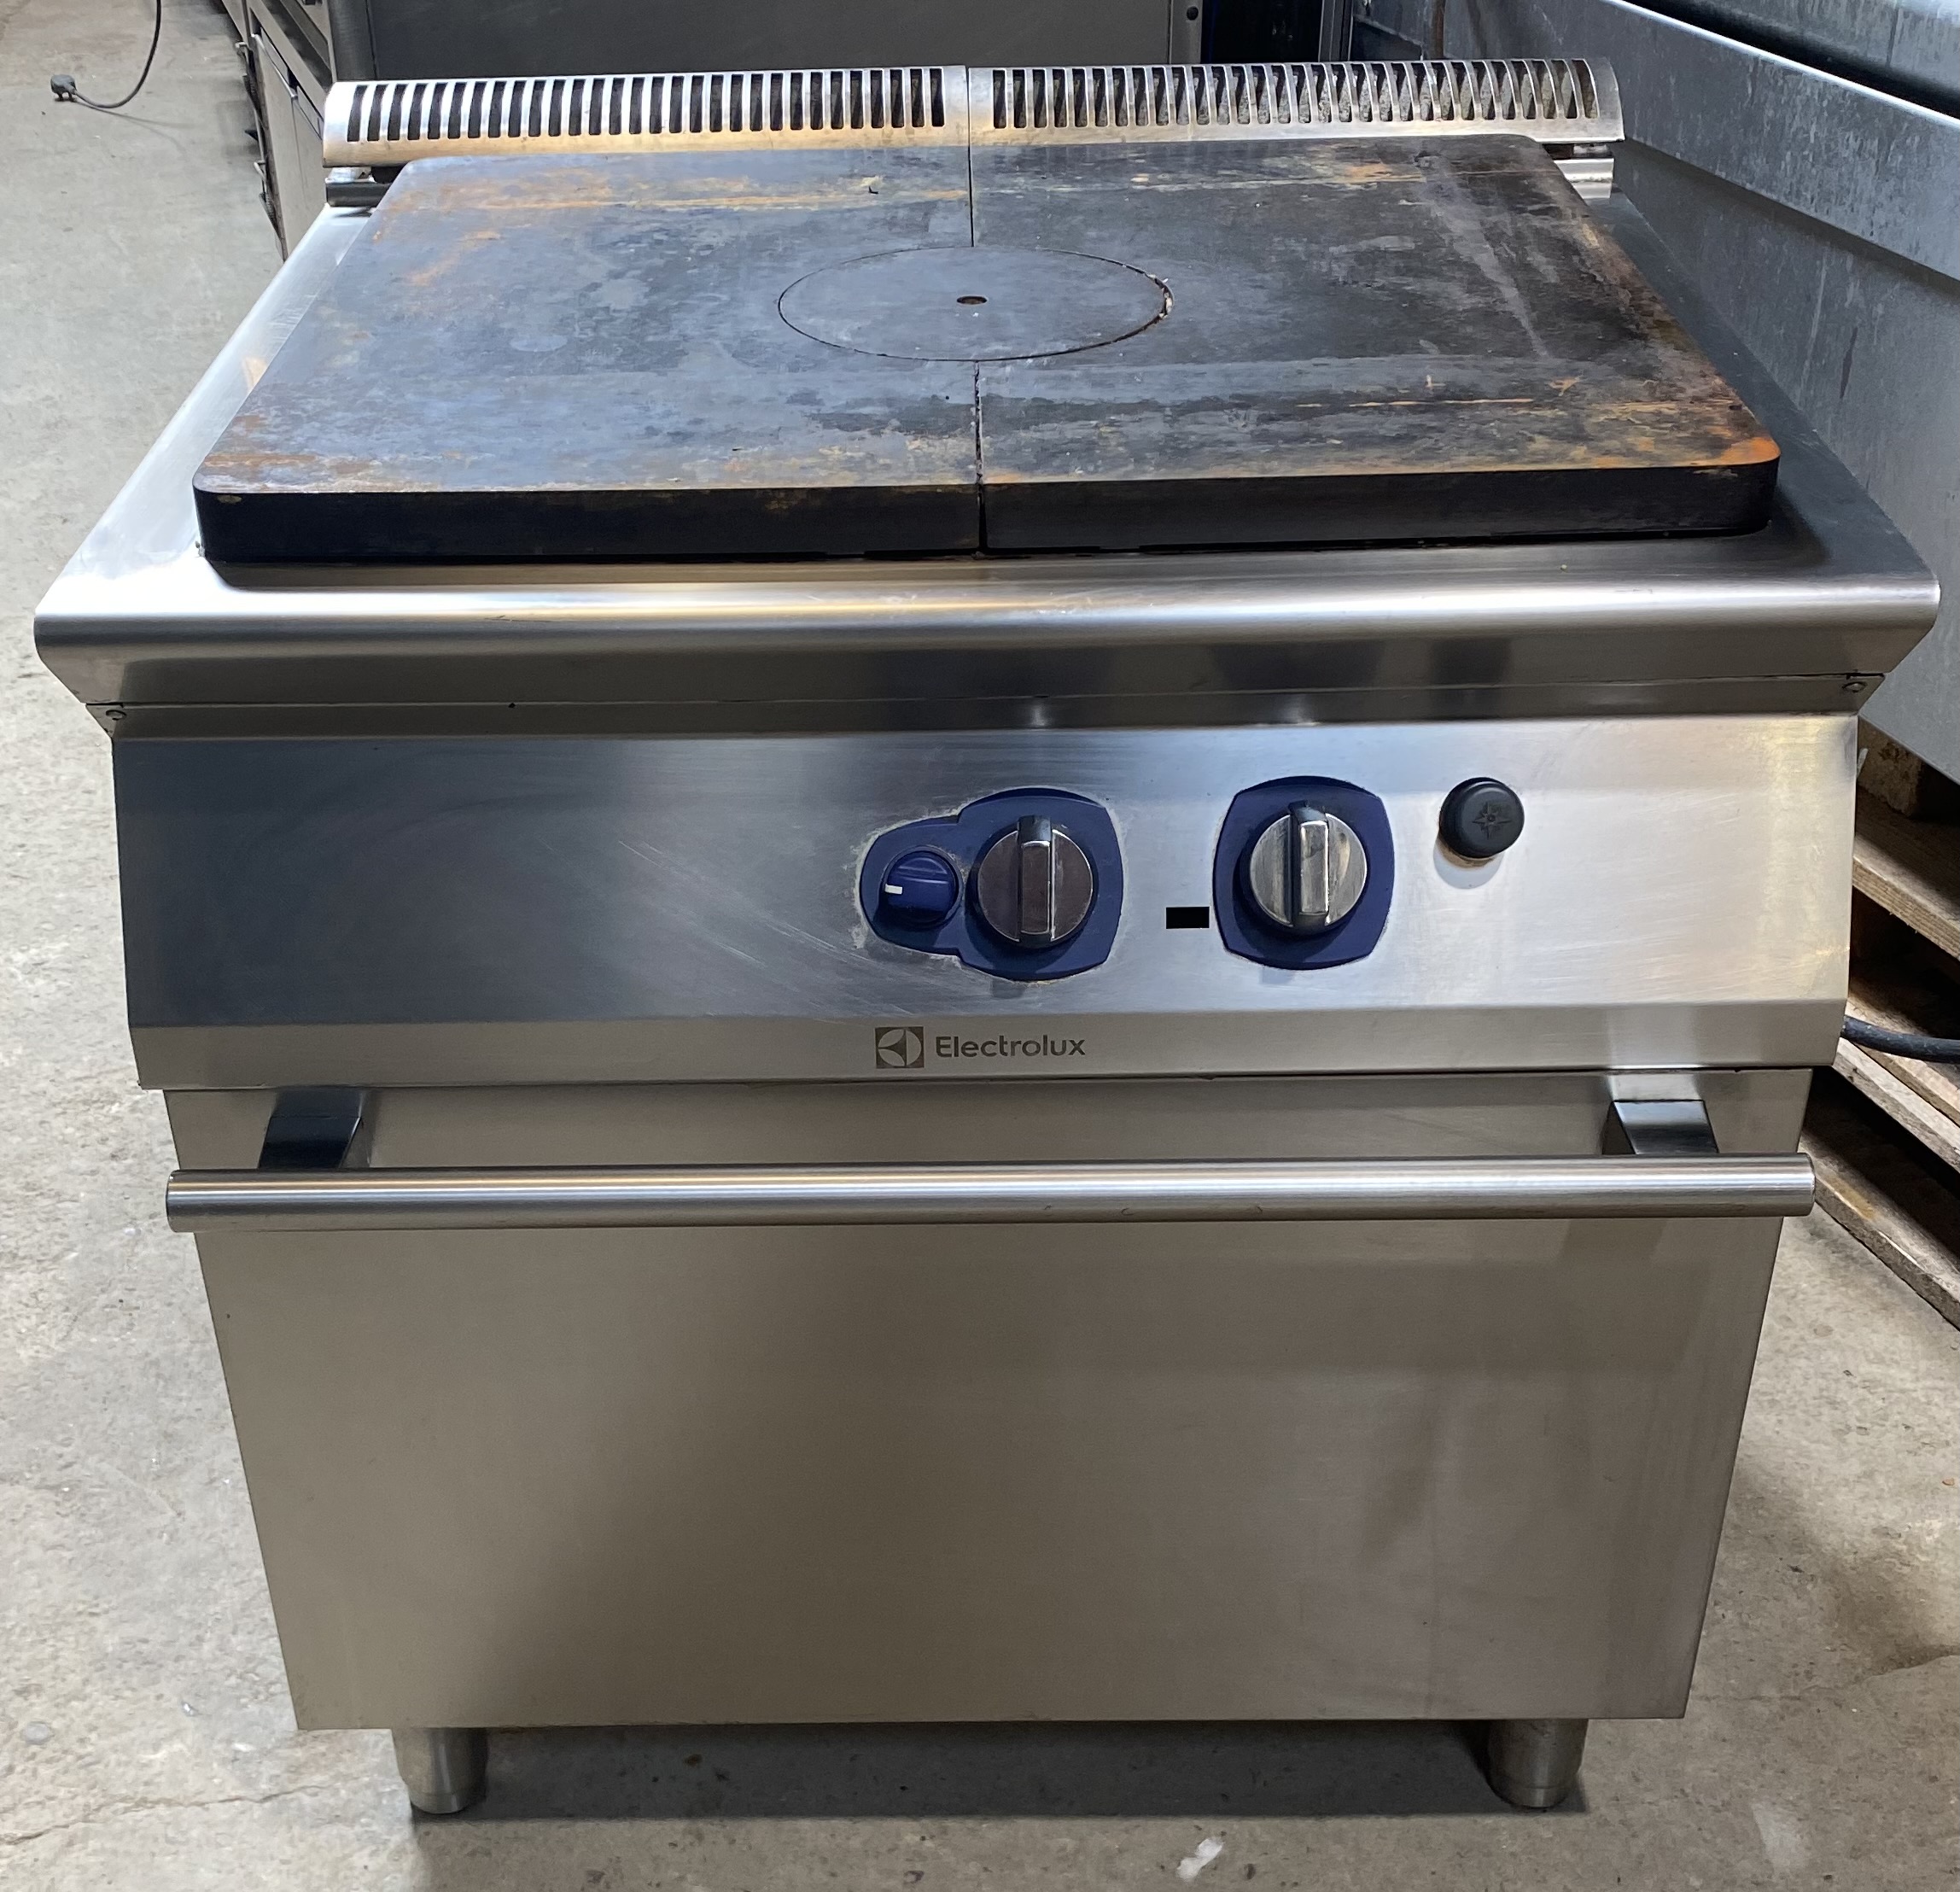 Electrolux solid top